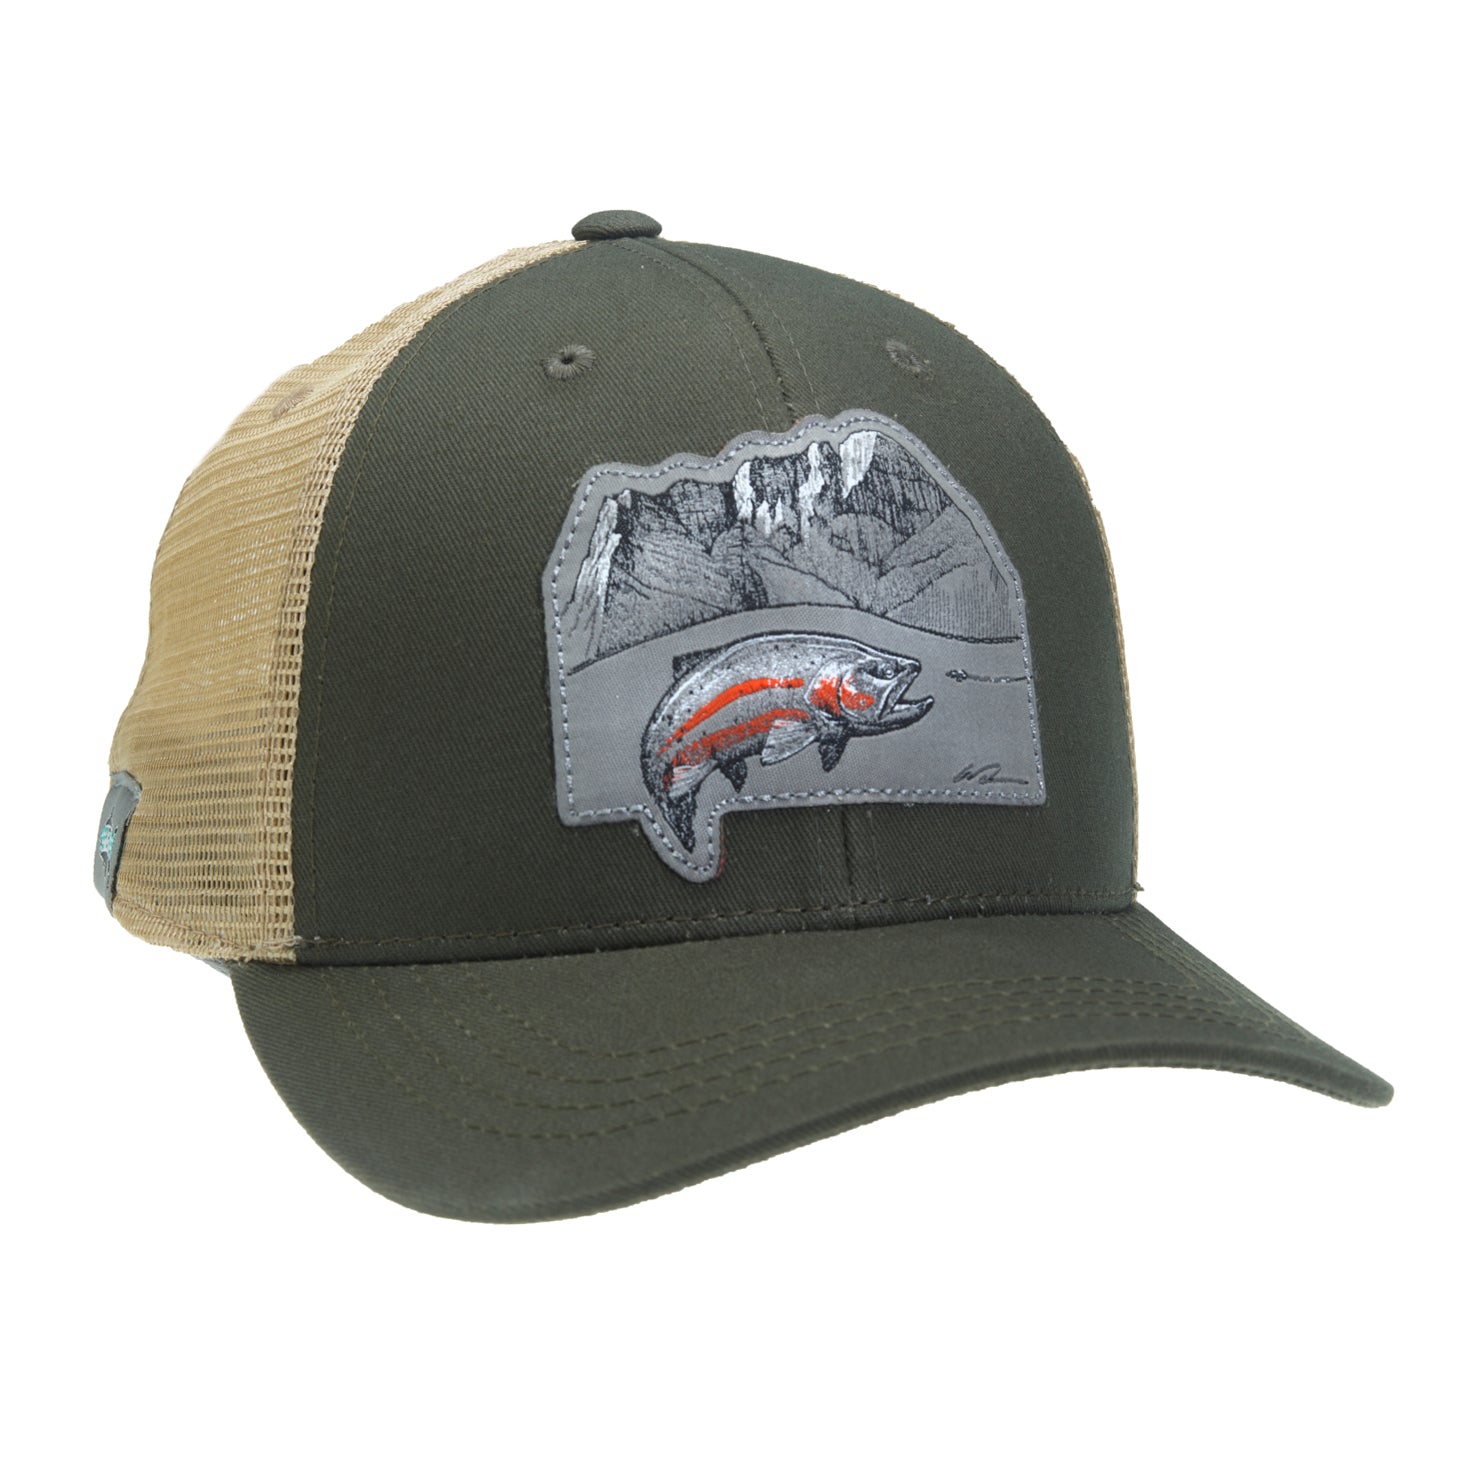 A hat with tan mesh in back and green fabric in front has a patch that shows a cutthroat trout chasing a fly in front of a mountain scene